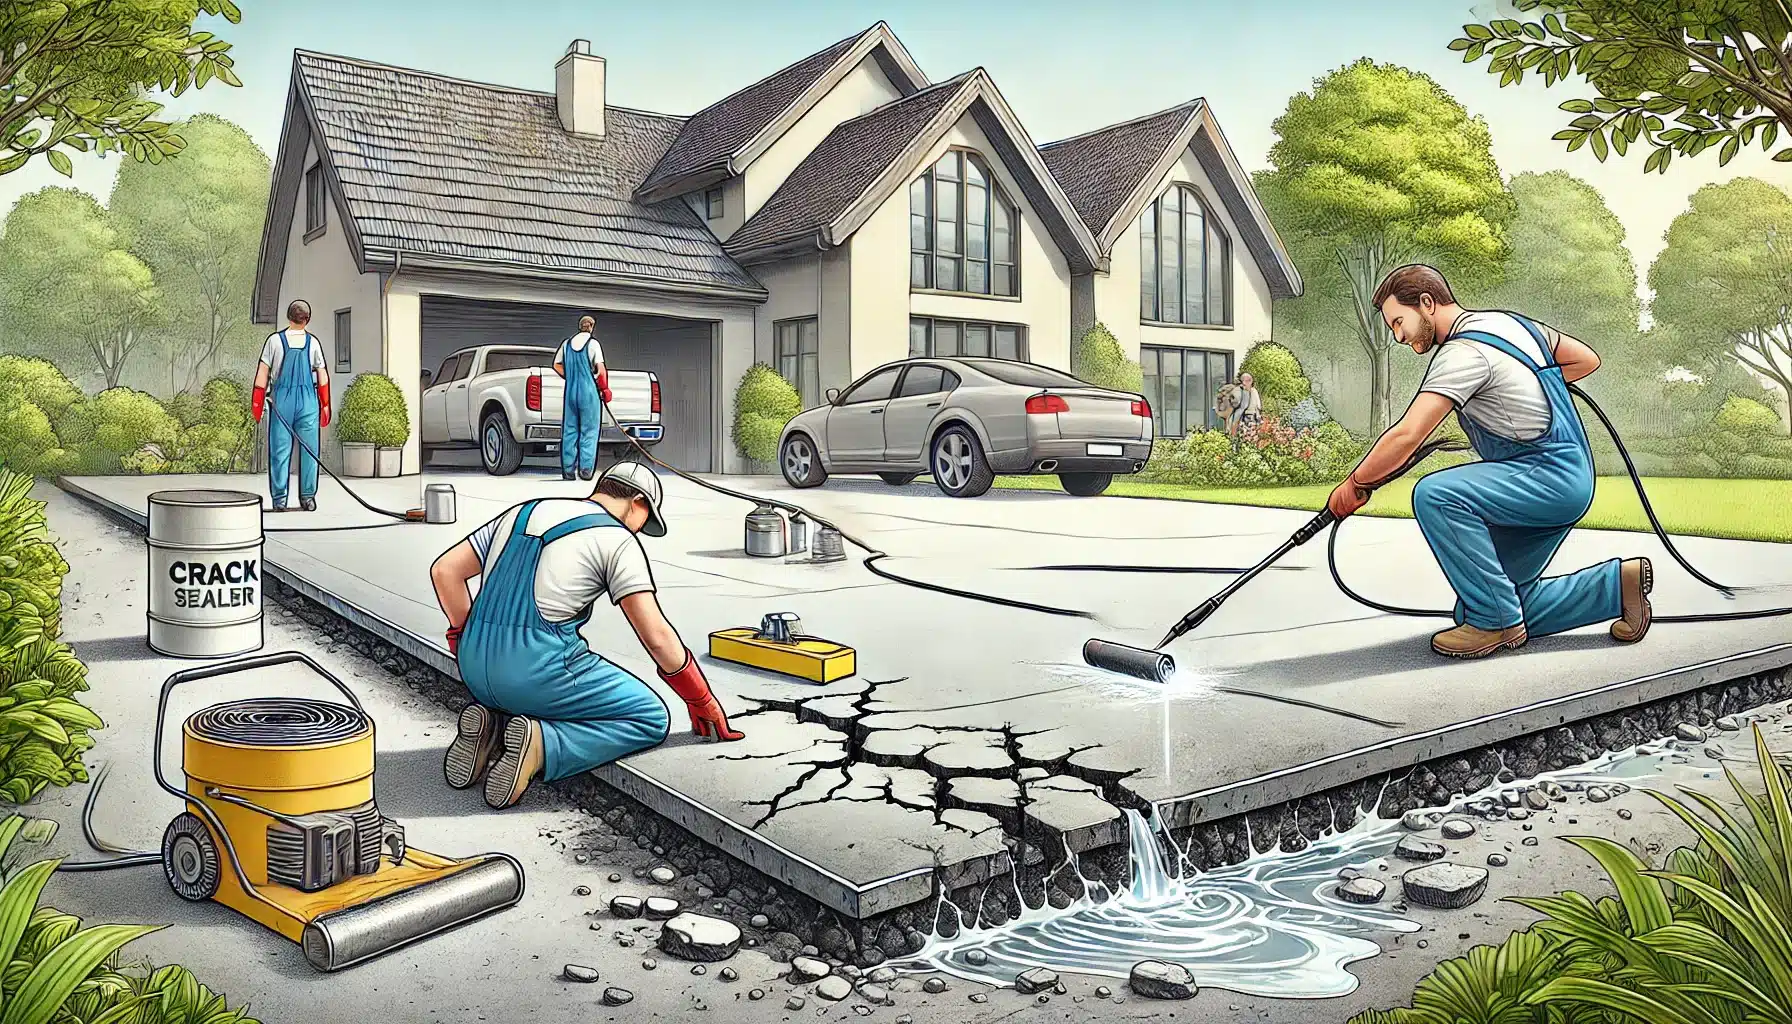 This image illustrates various maintenance tasks such as cleaning, crack repair, and sealing, highlighting the comprehensive care needed for concrete driveways.